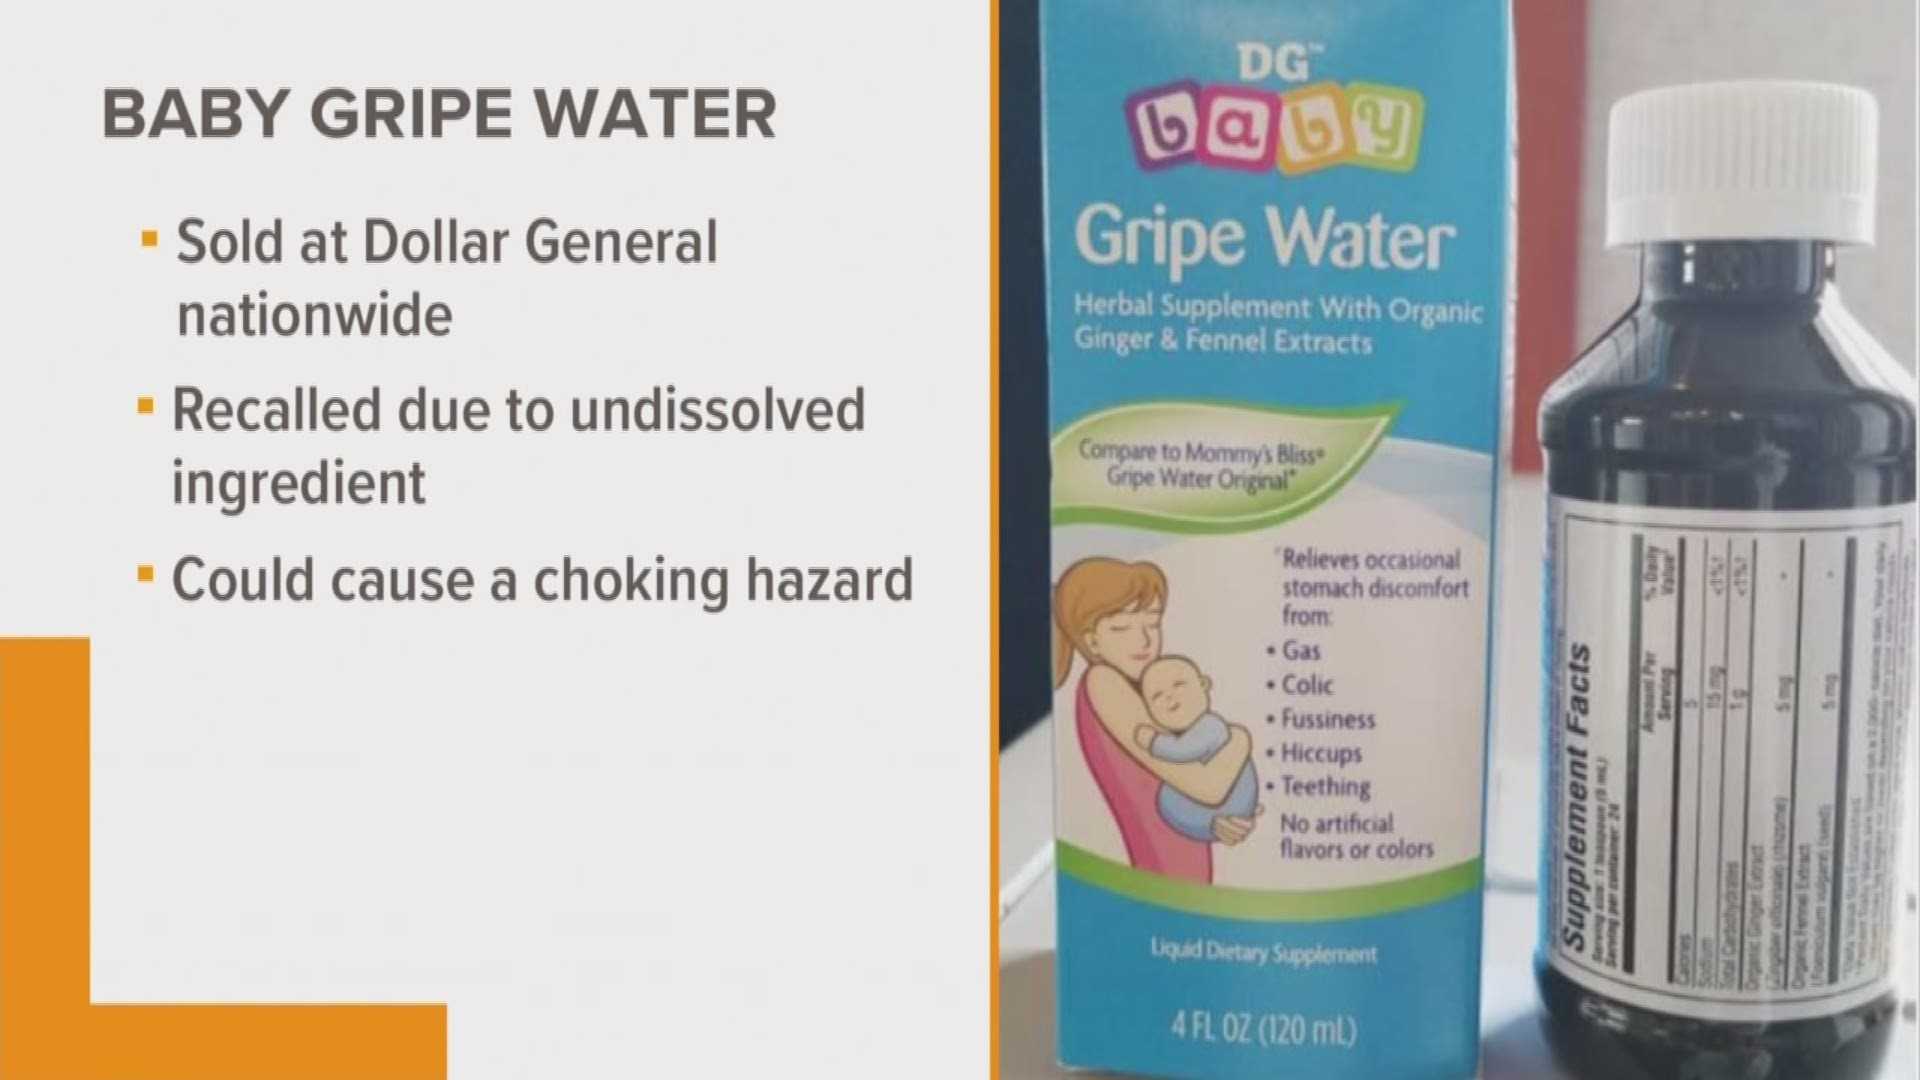 The FDA is recalling a drink for infants that is sold at Dollar General.